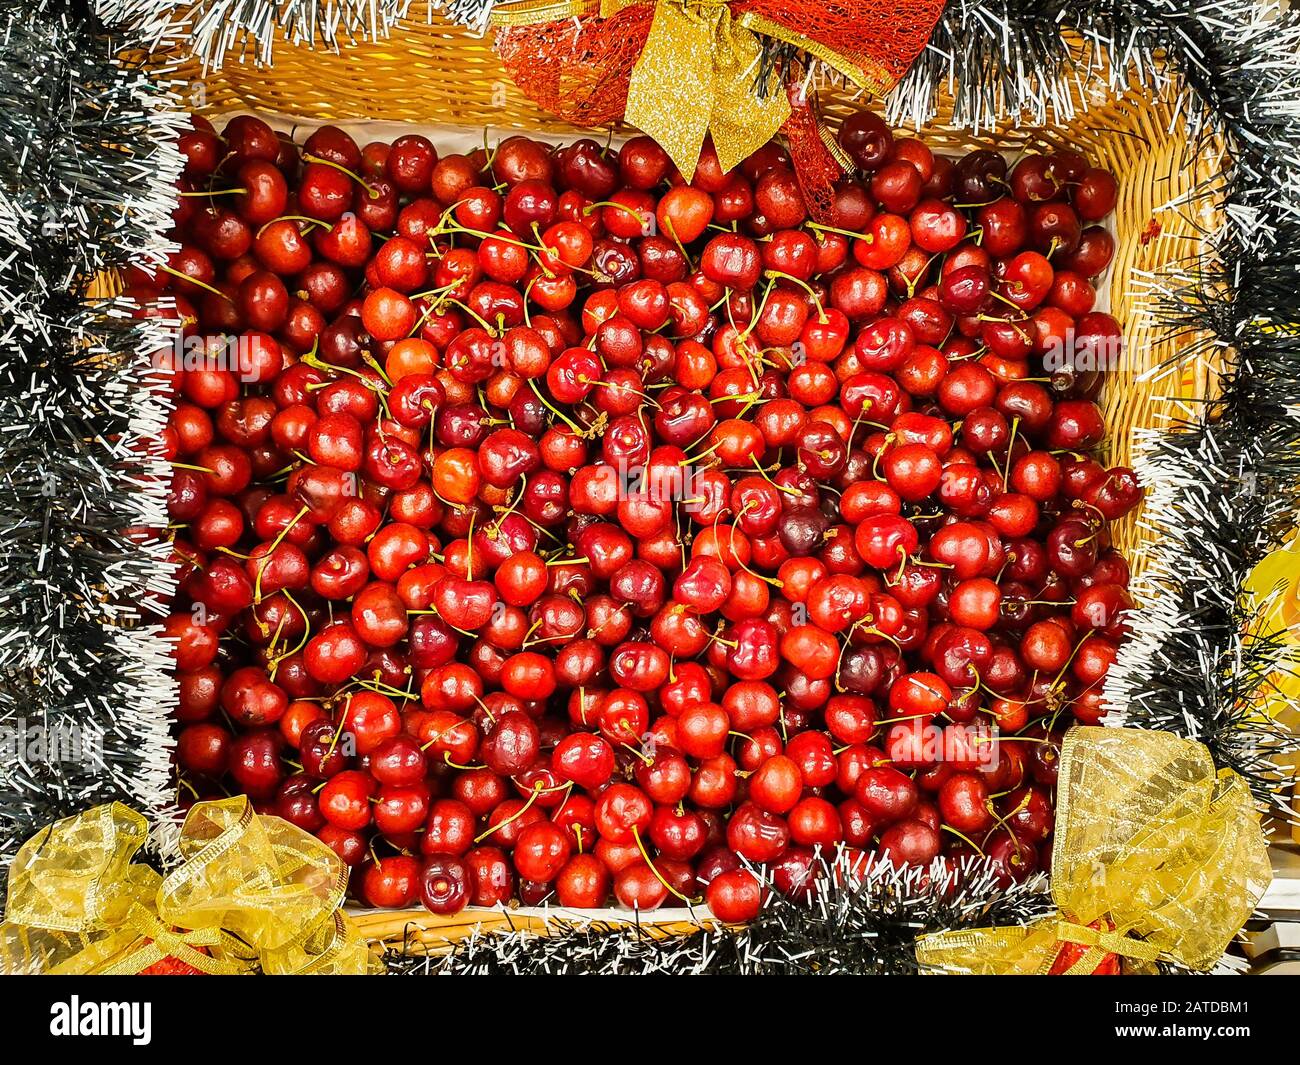 Overhead view of fresh cherries in a Christmas basket Stock Photo